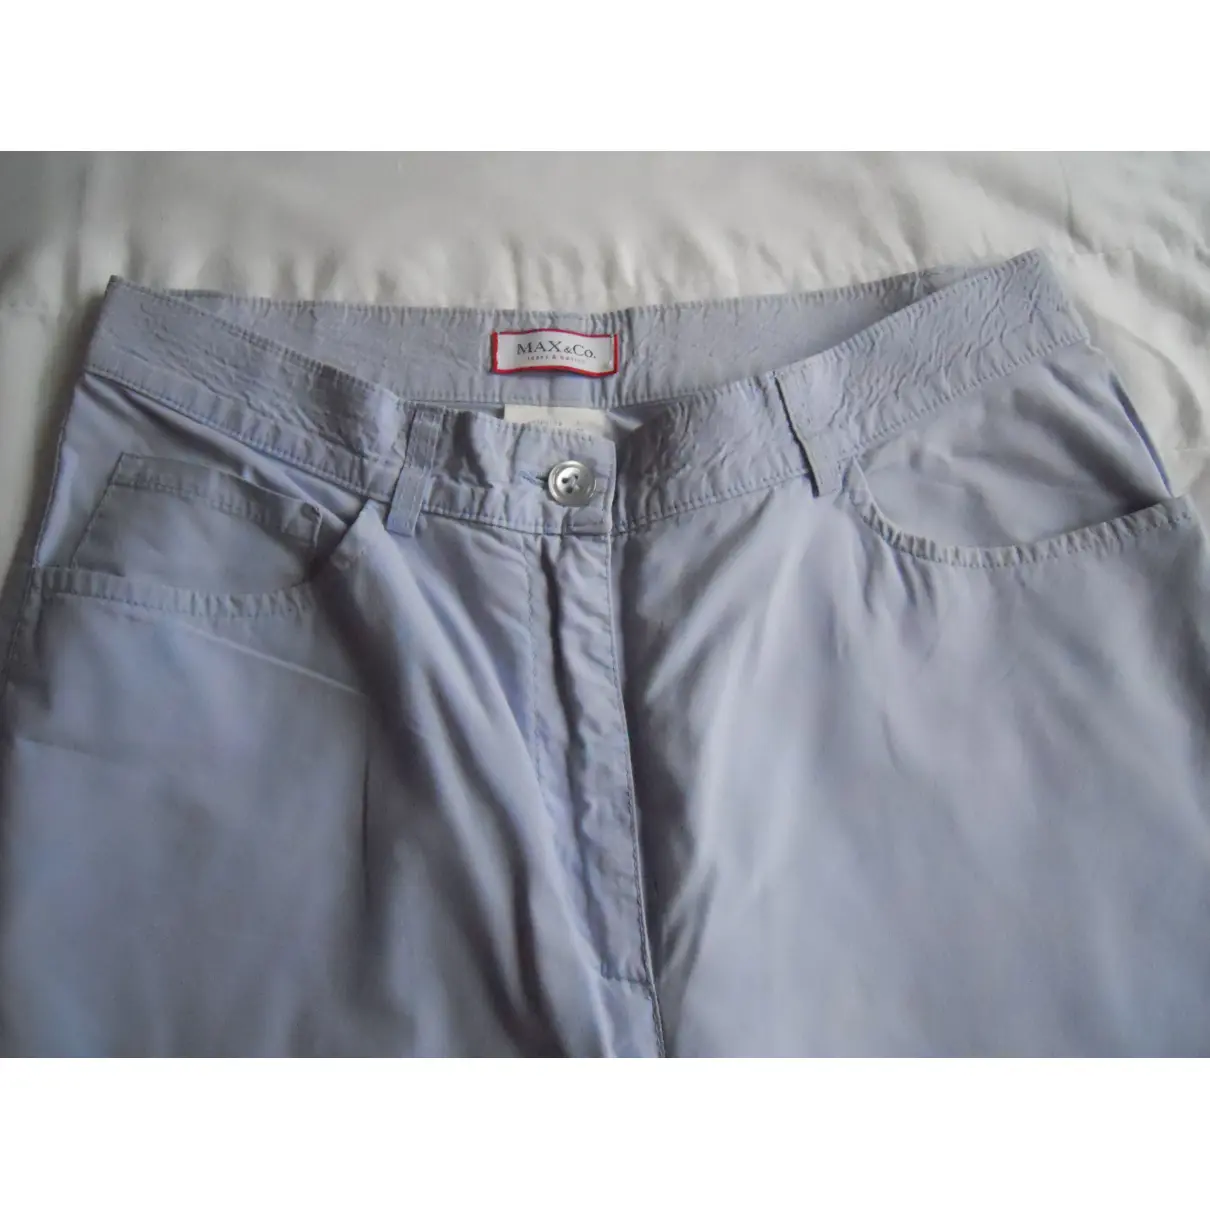 Trousers Max & Co - Vintage